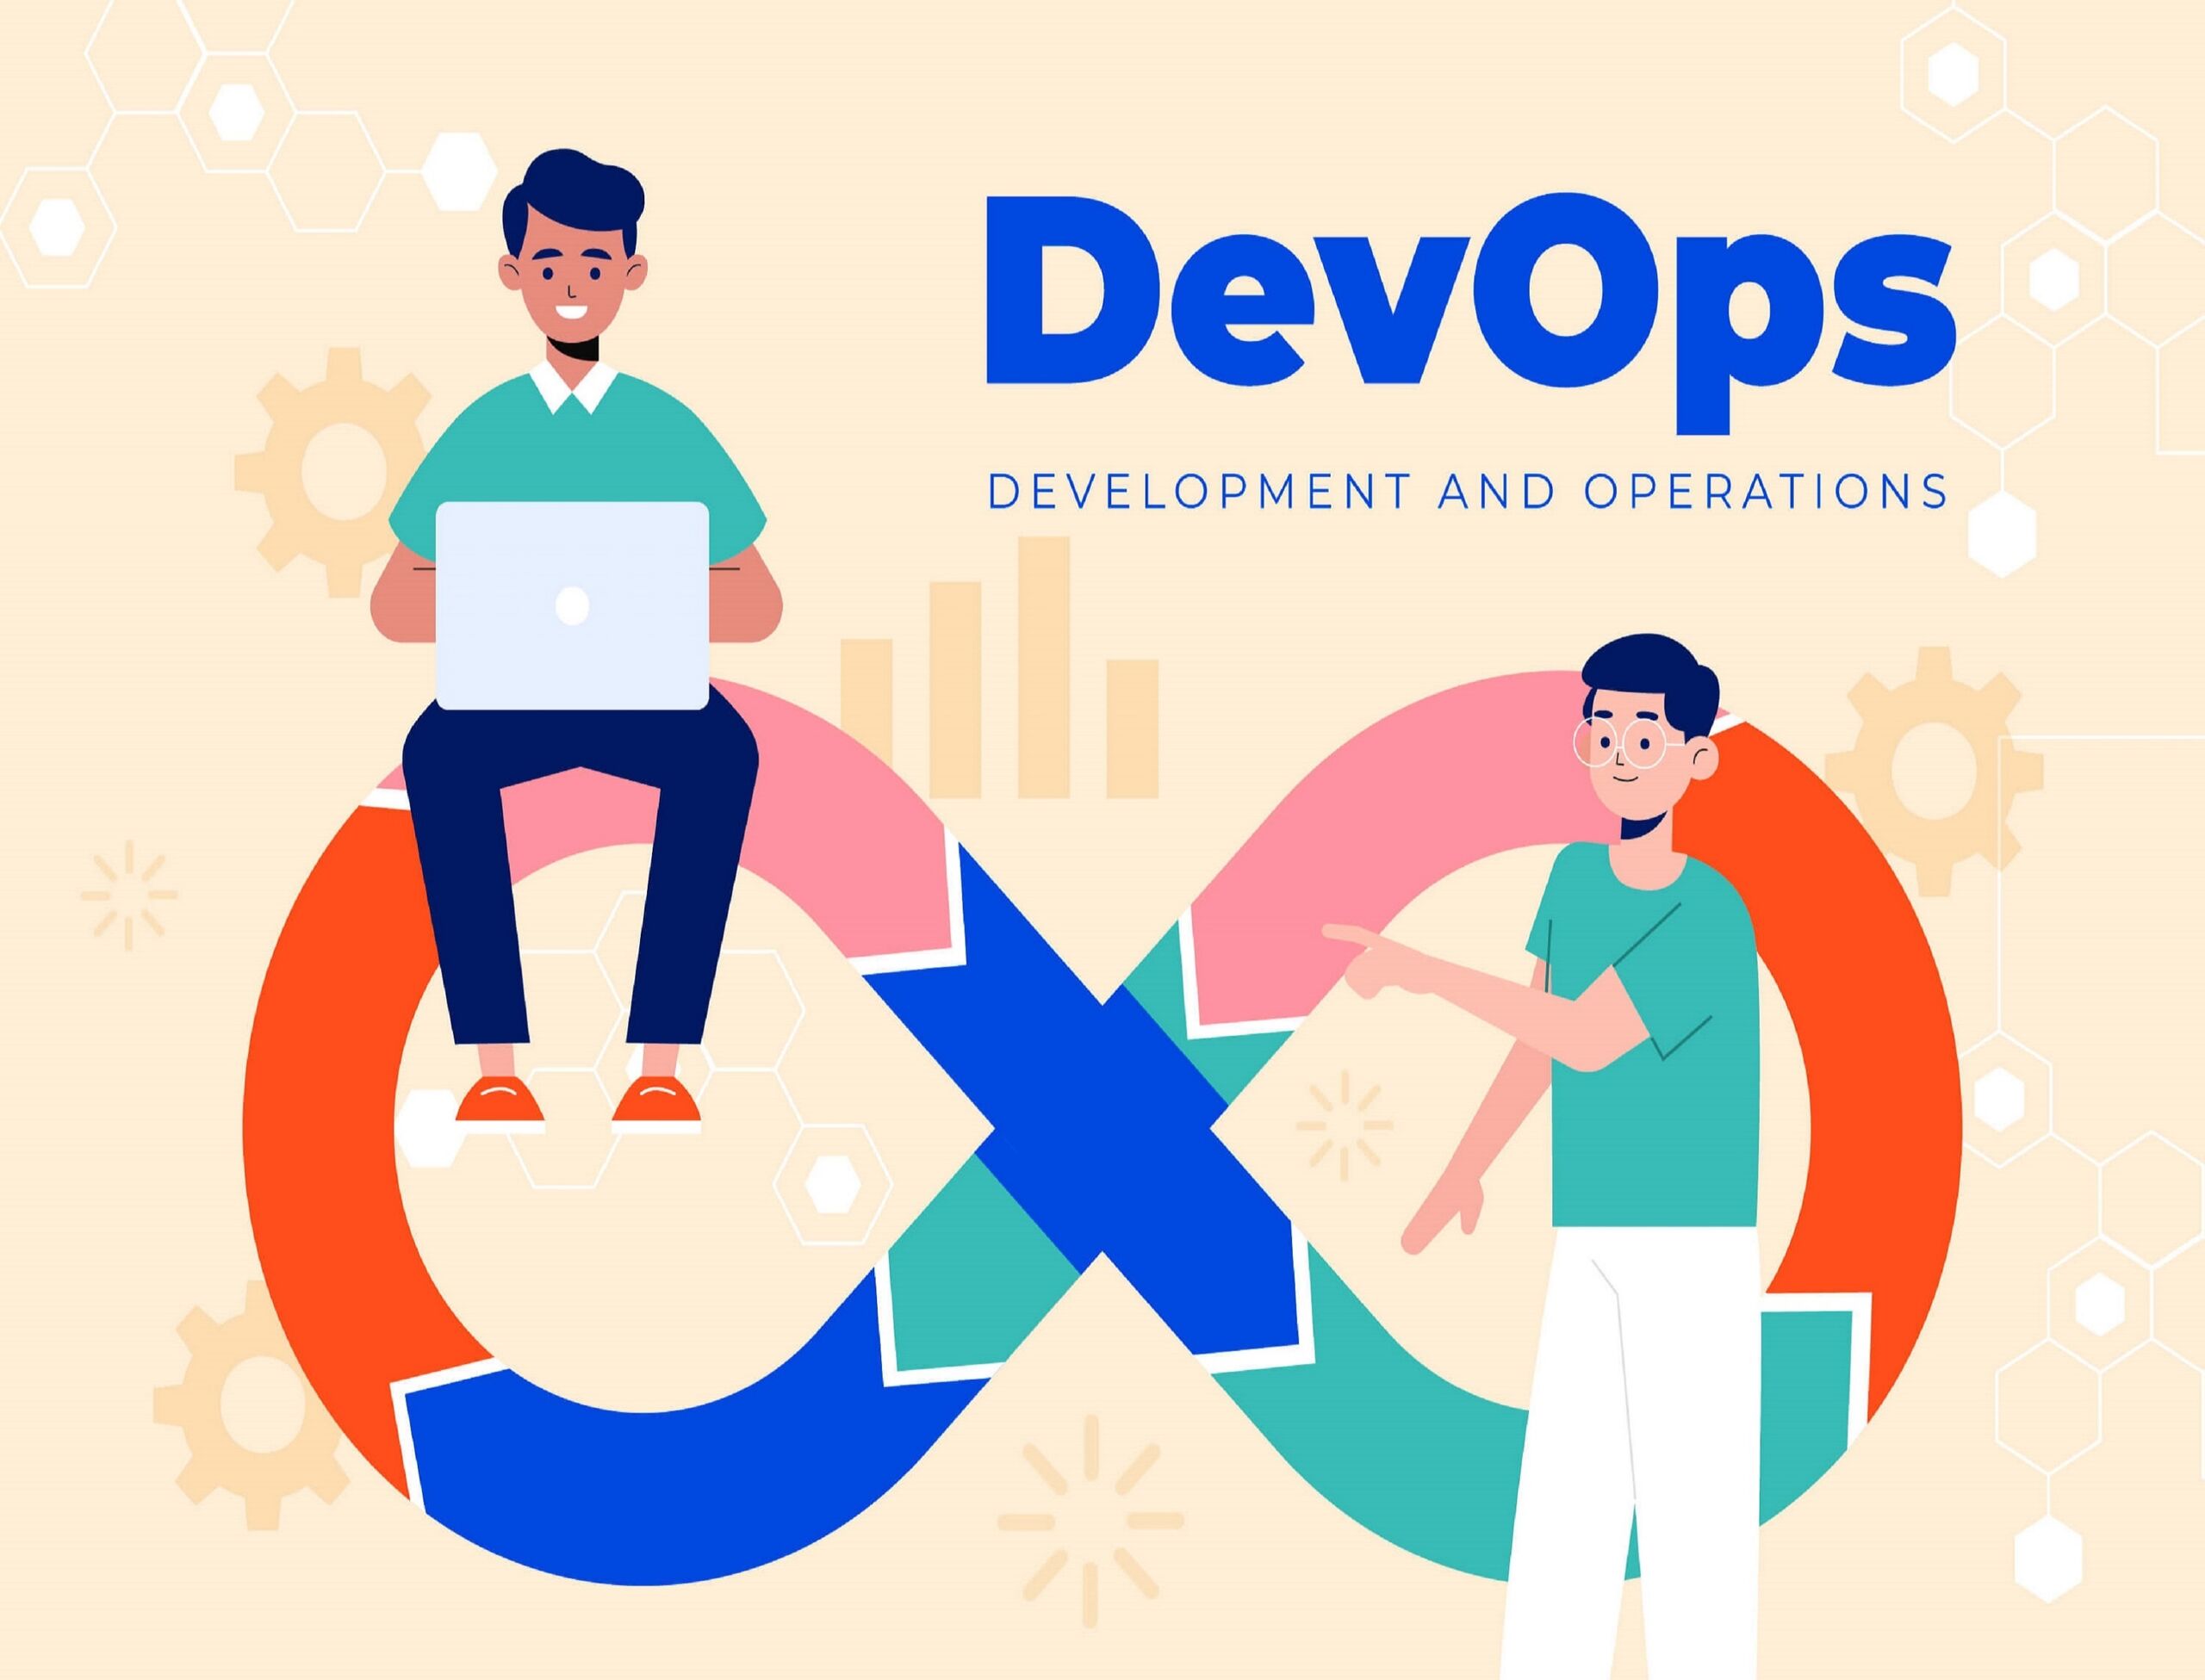 What technologies do i need to know for devops?